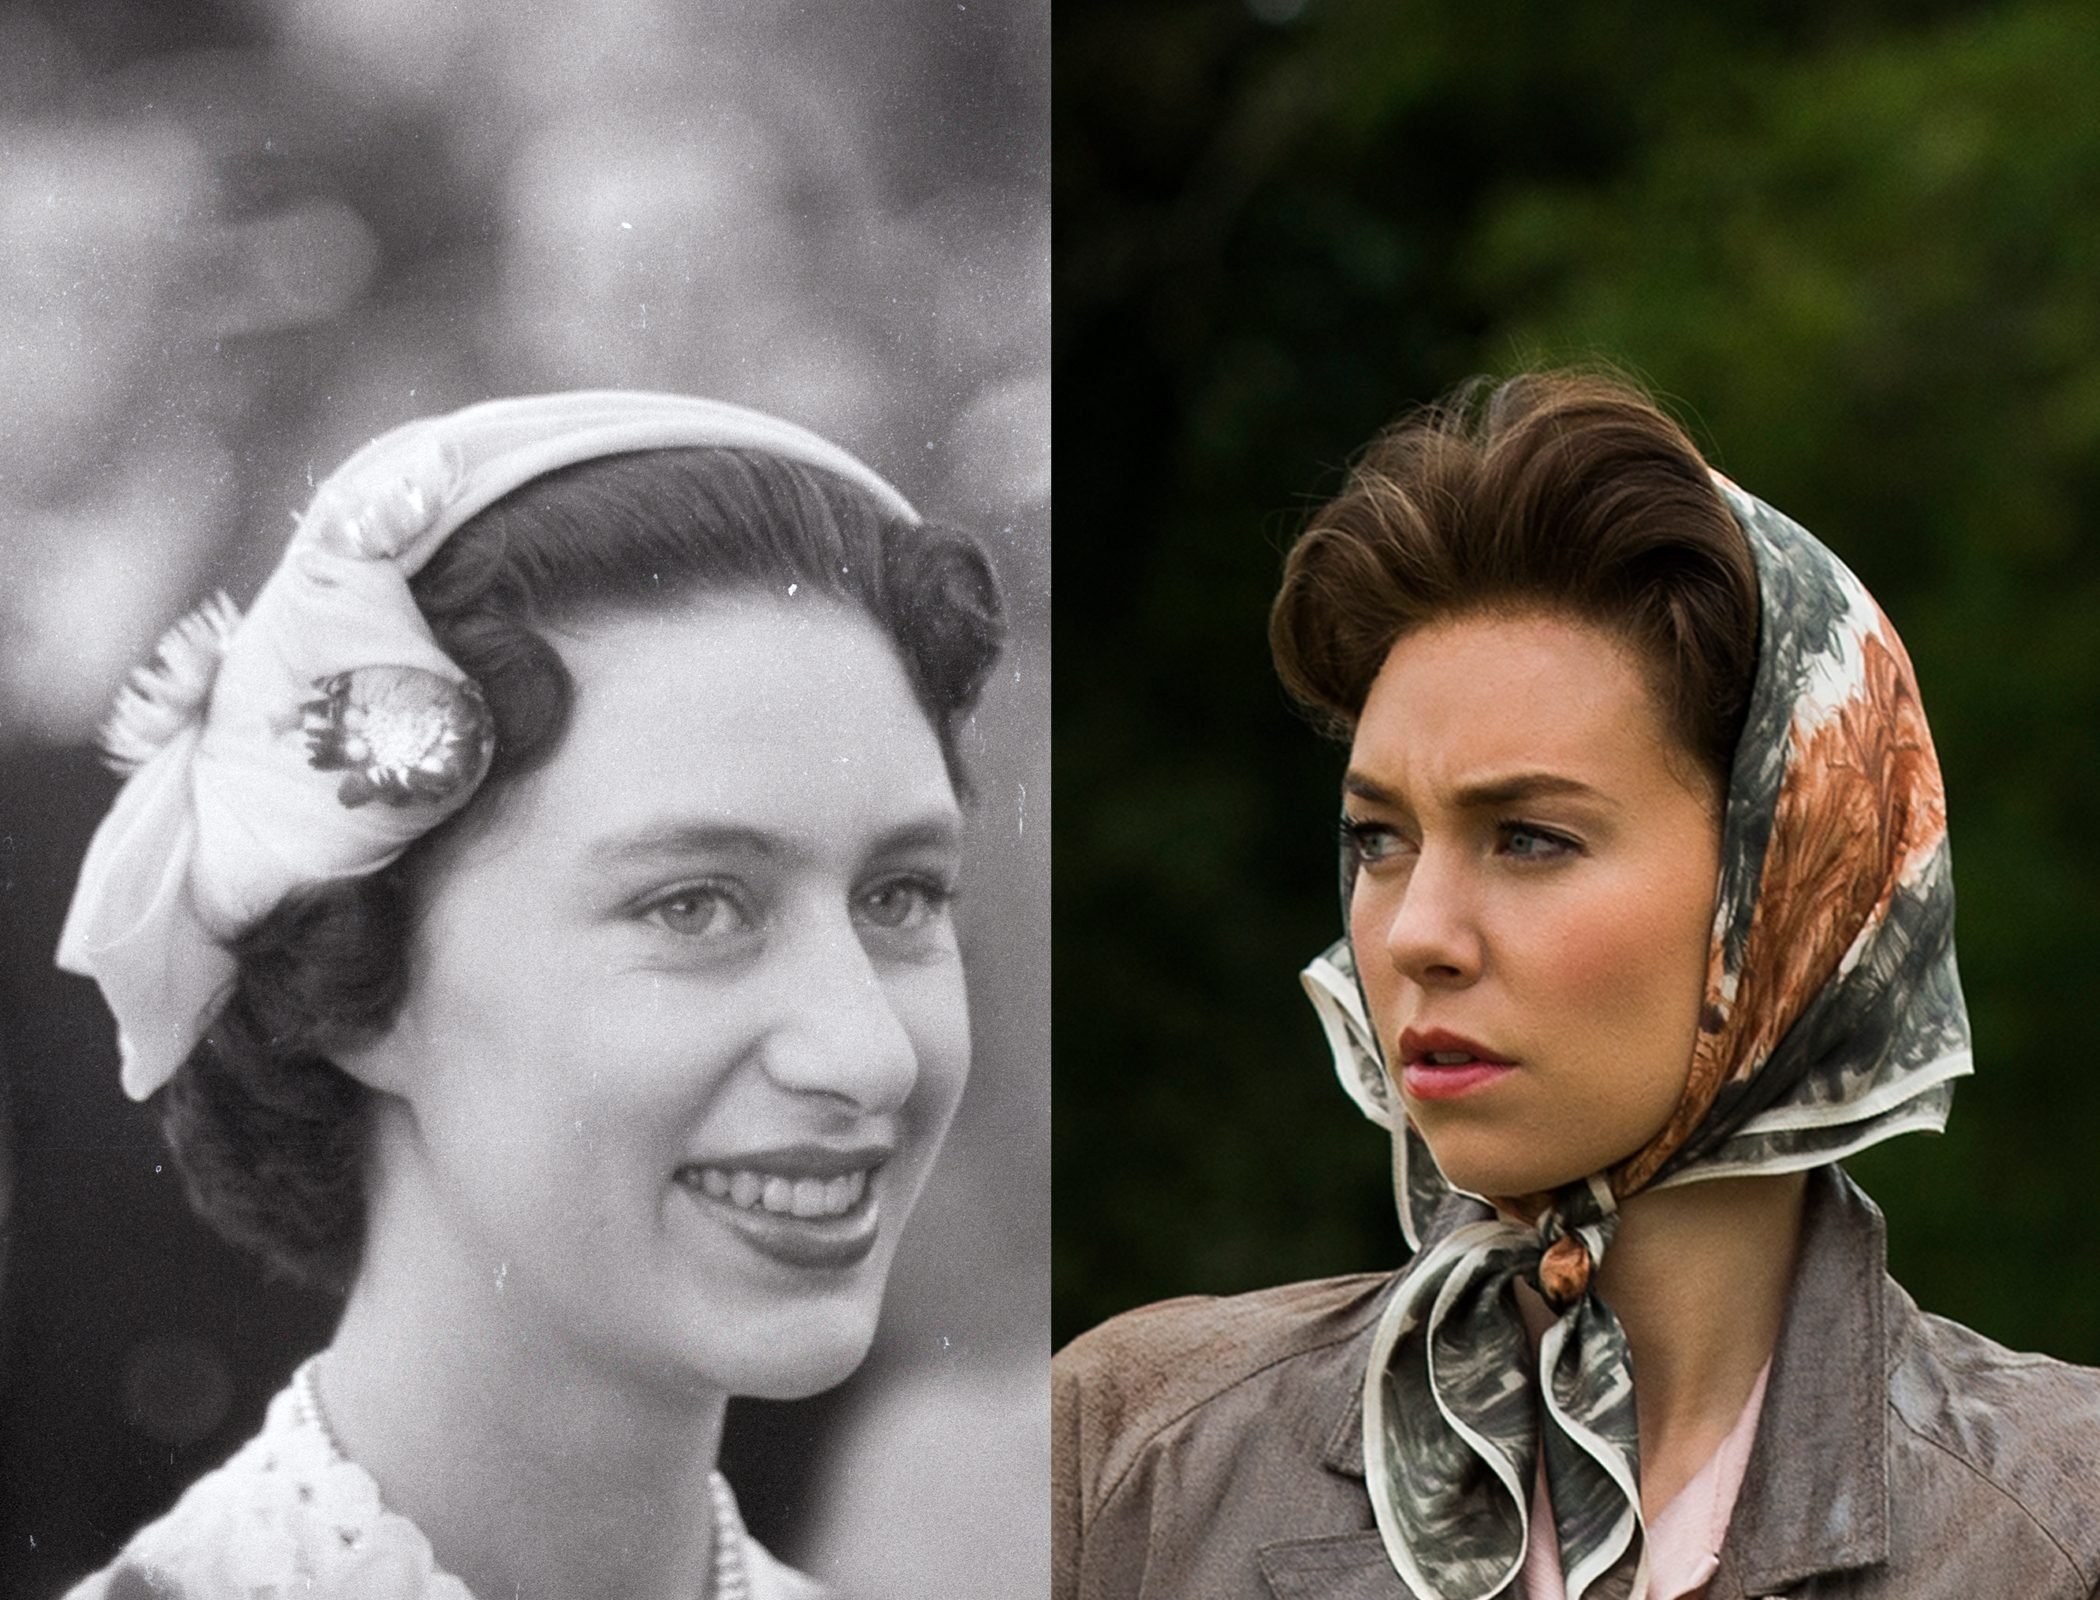 Princess Margaret Rose of York as a young woman, as played by Vanessa Kirby